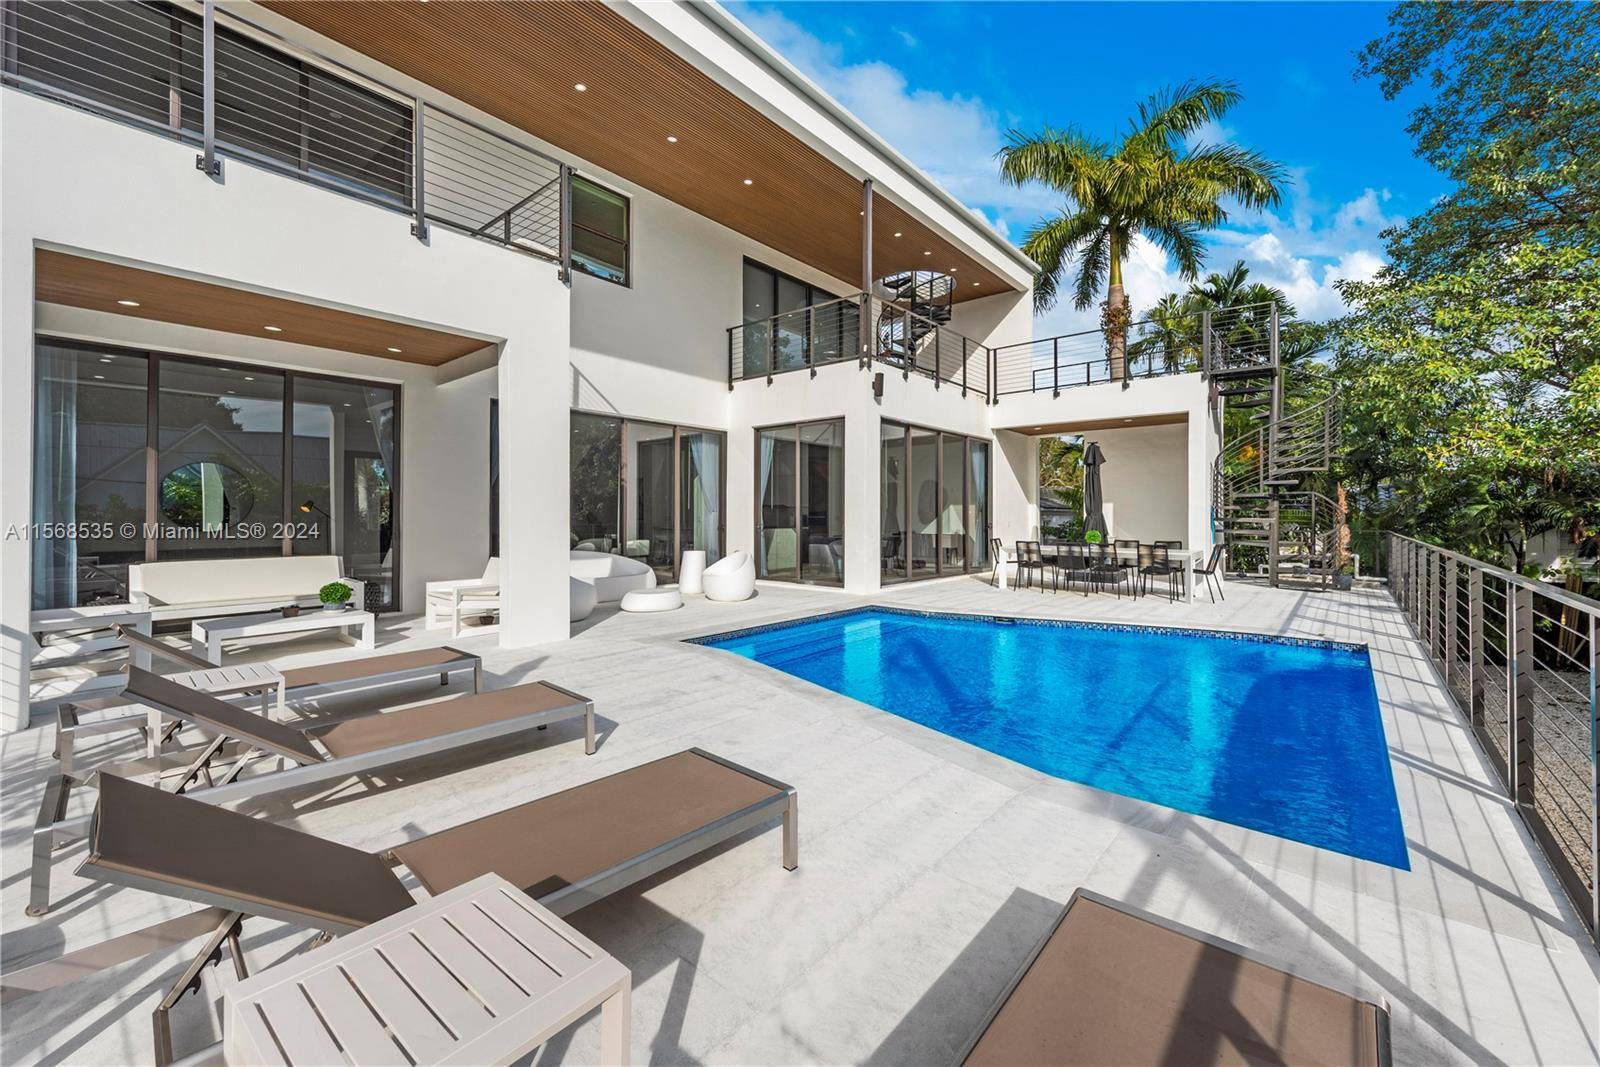 This Brand new elegant home located in the heart of Miami Shores was developed with elegance, style and practicality in mind.